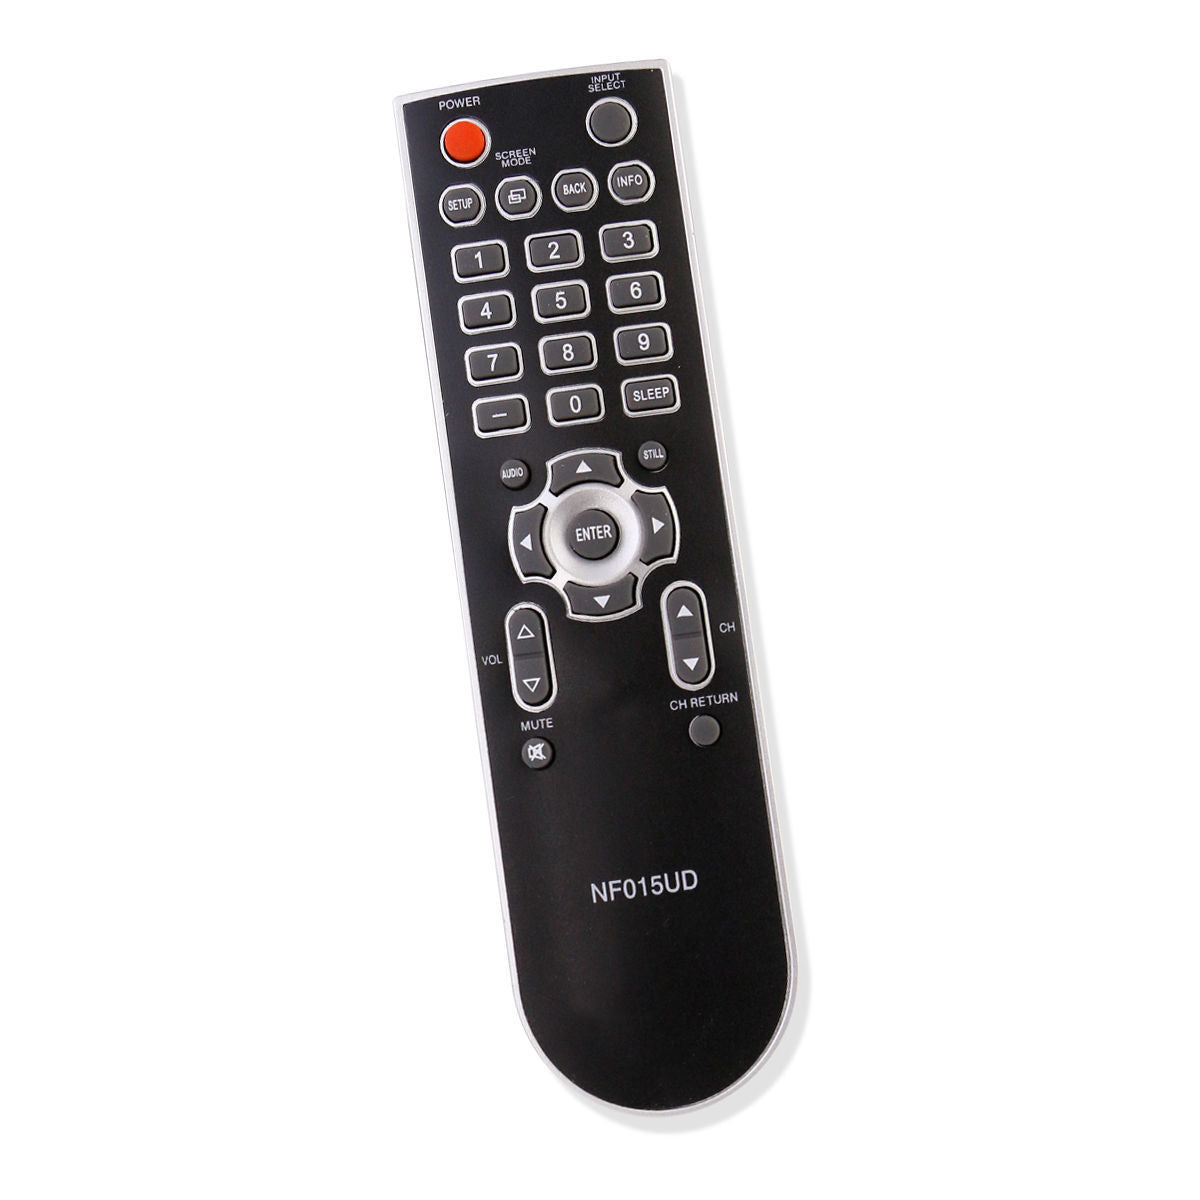 New Remote Control NF015UD NF020UD for Emerson Sylvania TV LC320EM8 LC420EM8